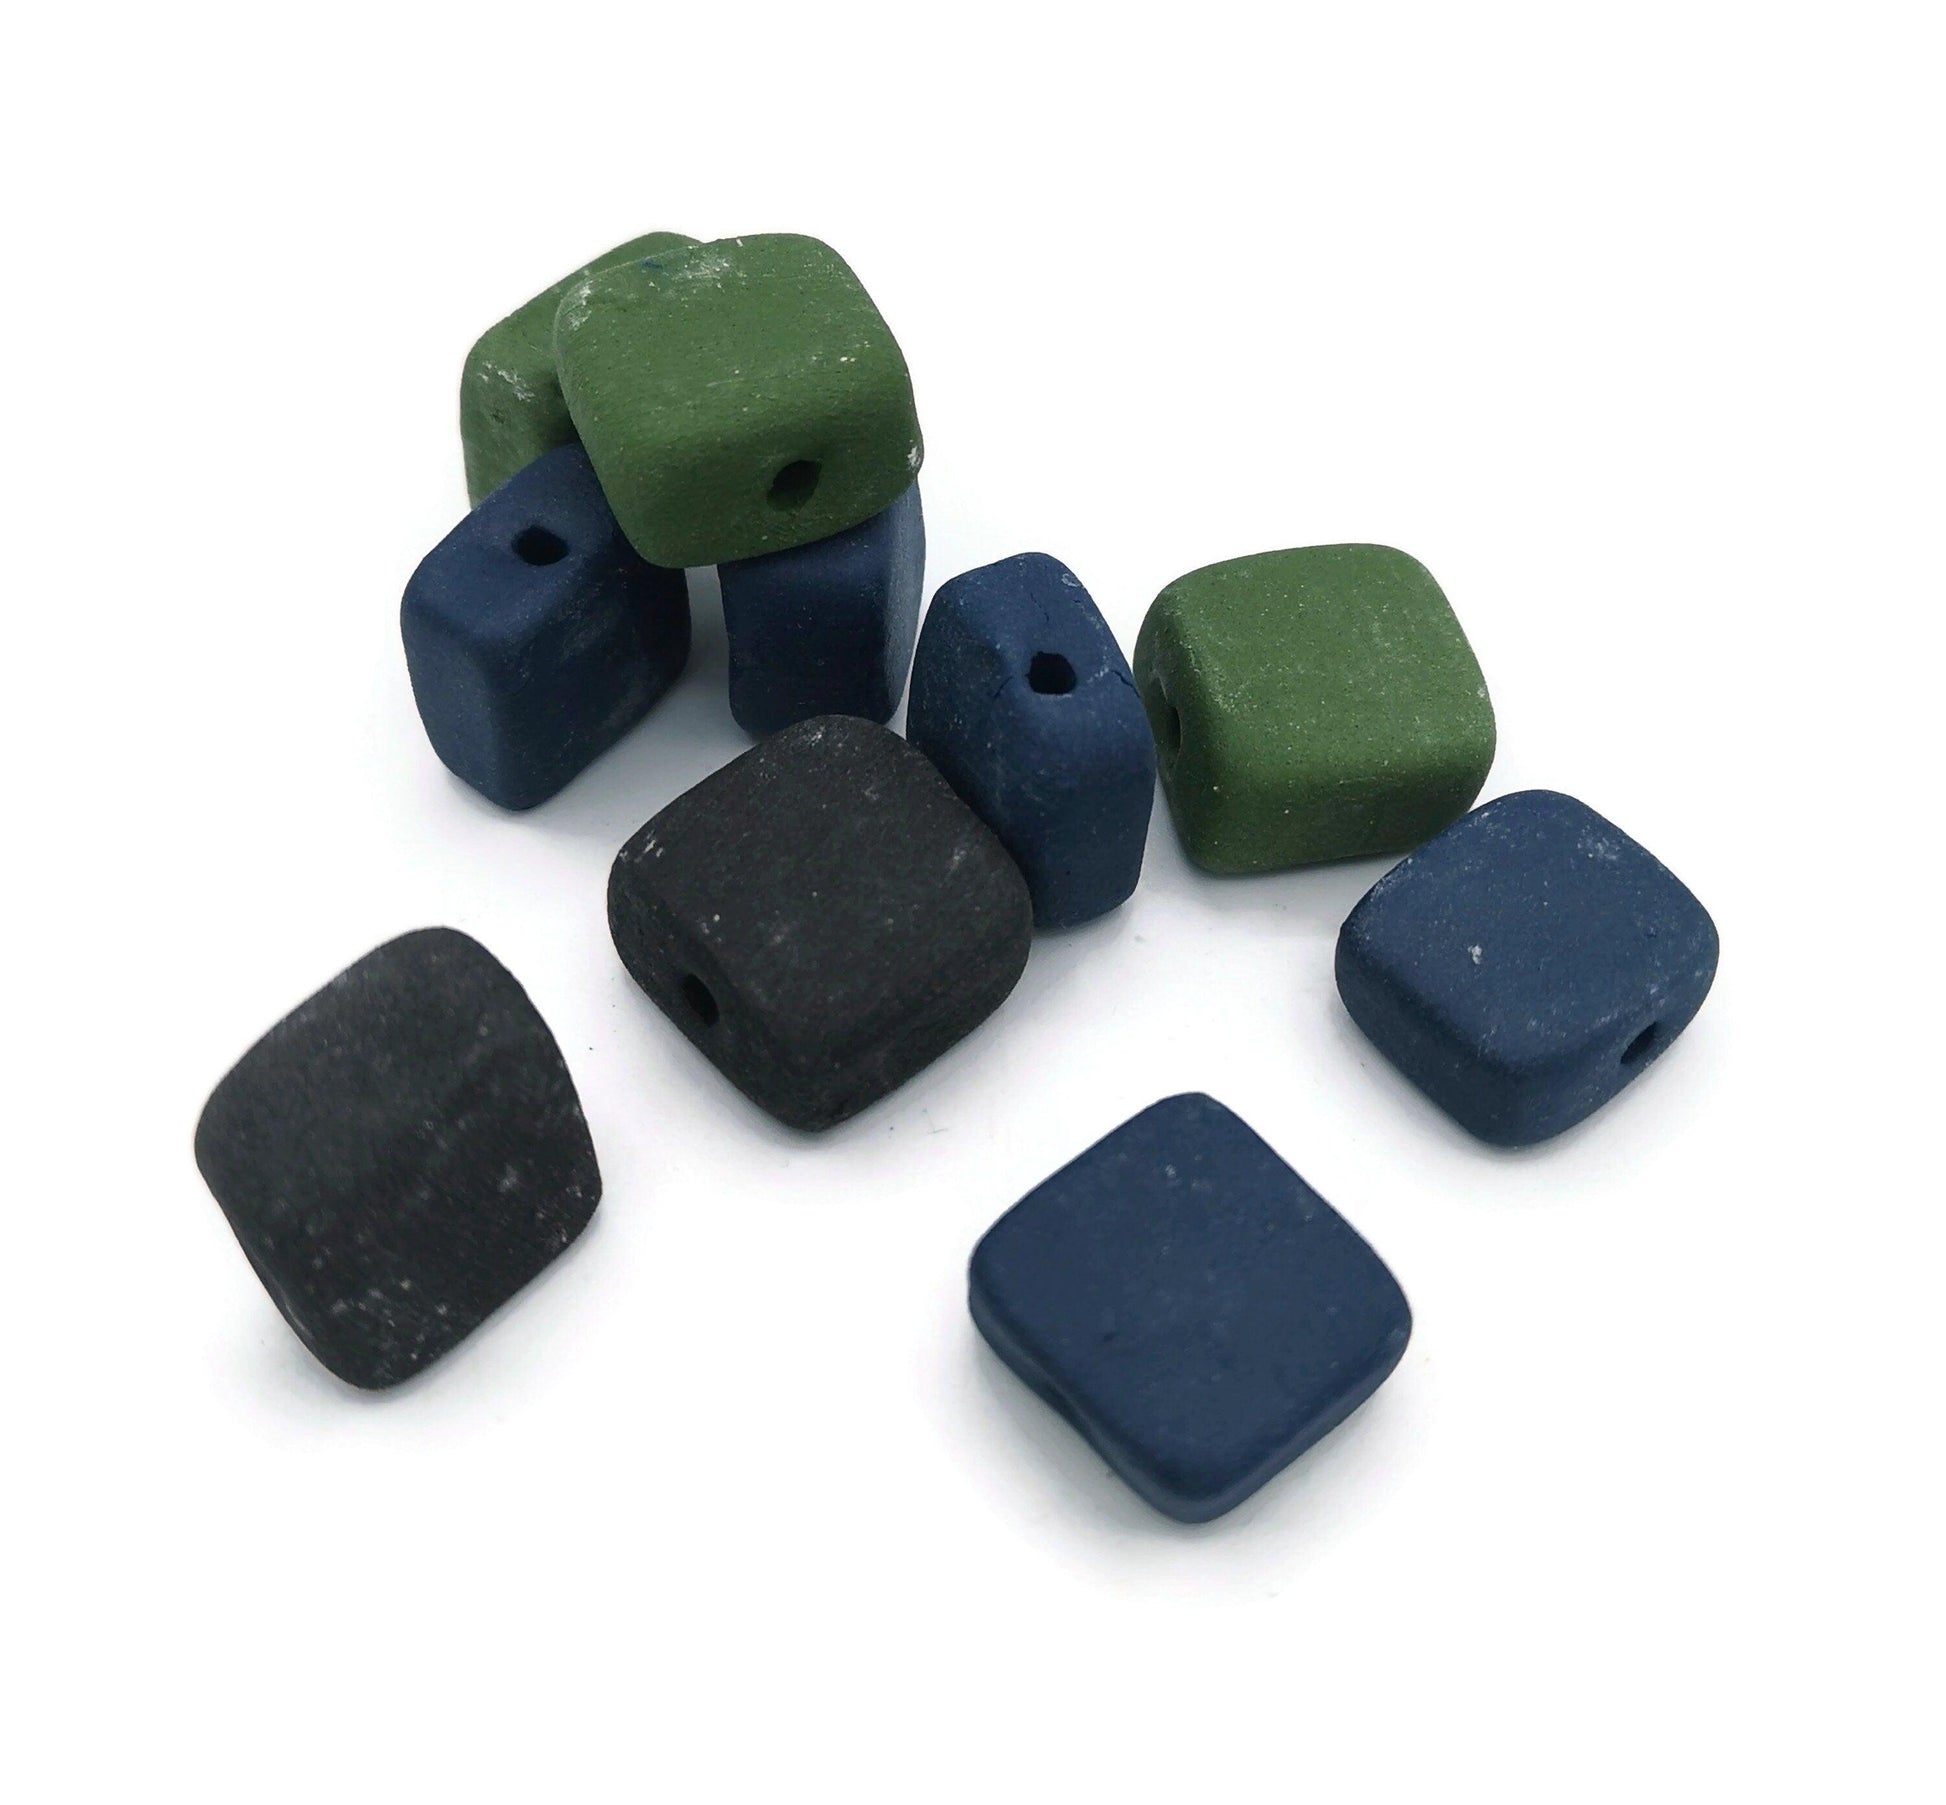 10Pc 15mm Ceramic Beads For jewelry Making 2mm Hole, Matte Square Clay Beads, Unique Assorted Beads Set Square Shape, Large Handmade Beads - Ceramica Ana Rafael